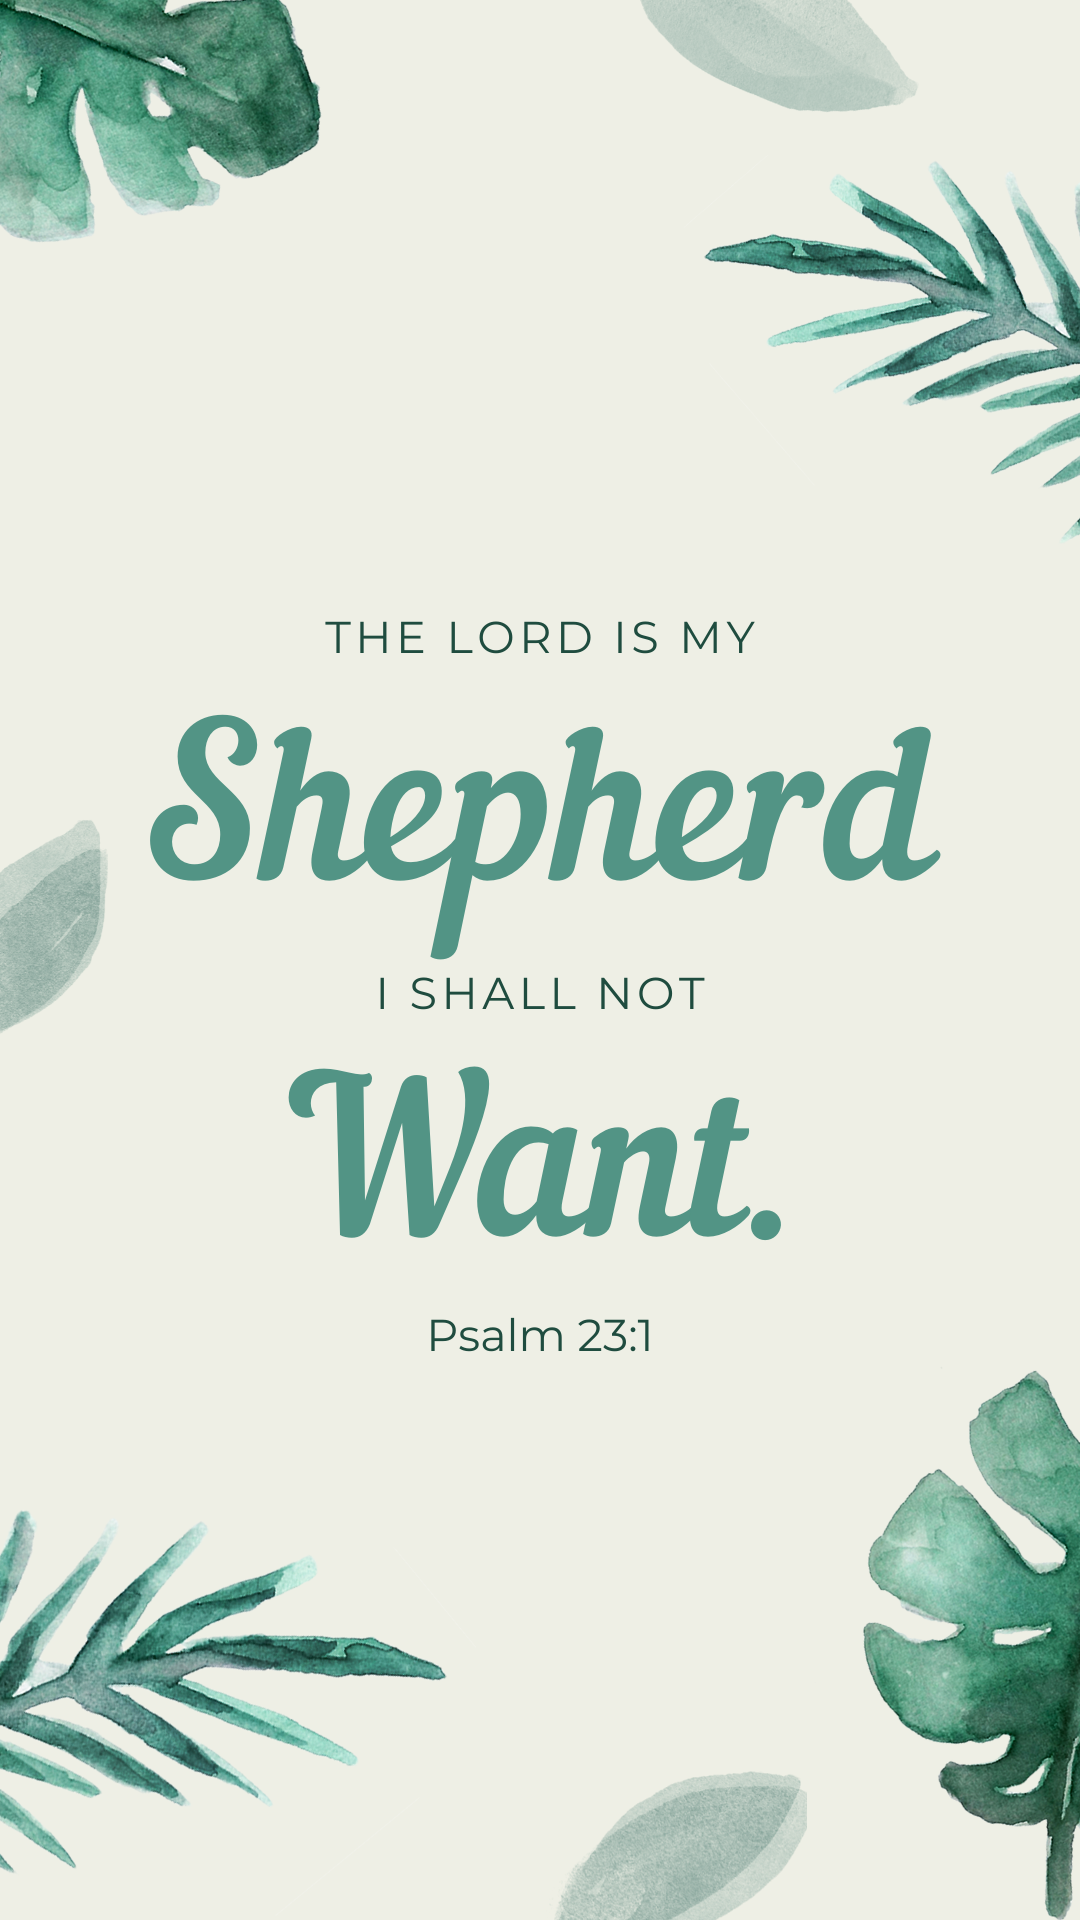 Buy Psalm 236 iPhone Wallpaper Christian Inspirational Online in India   Etsy